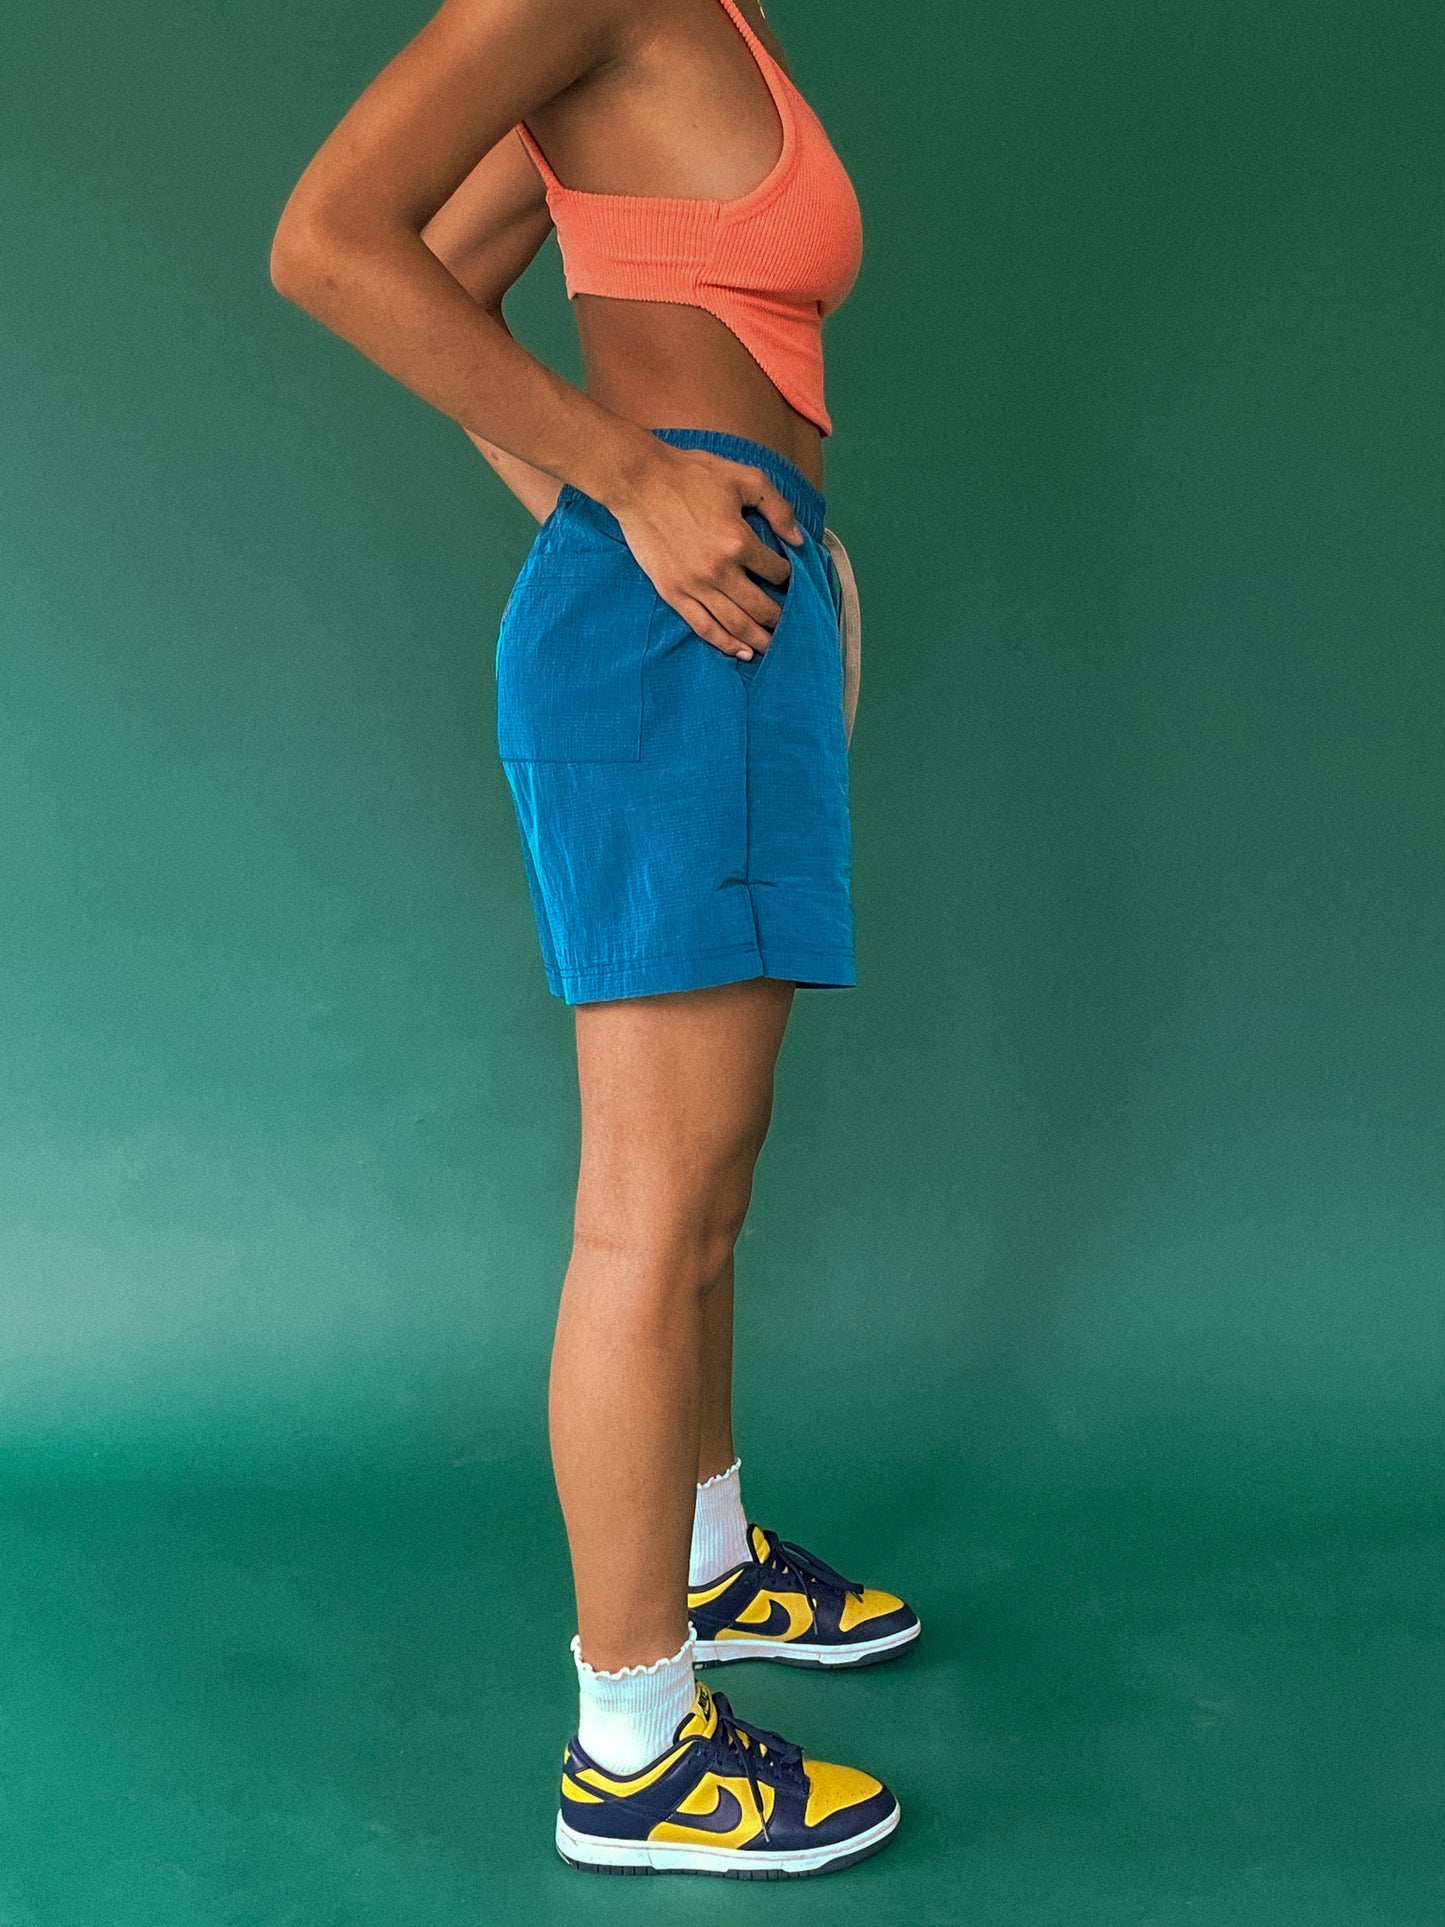 THE UNISEX RIPSTOP SHORTS - forever blue